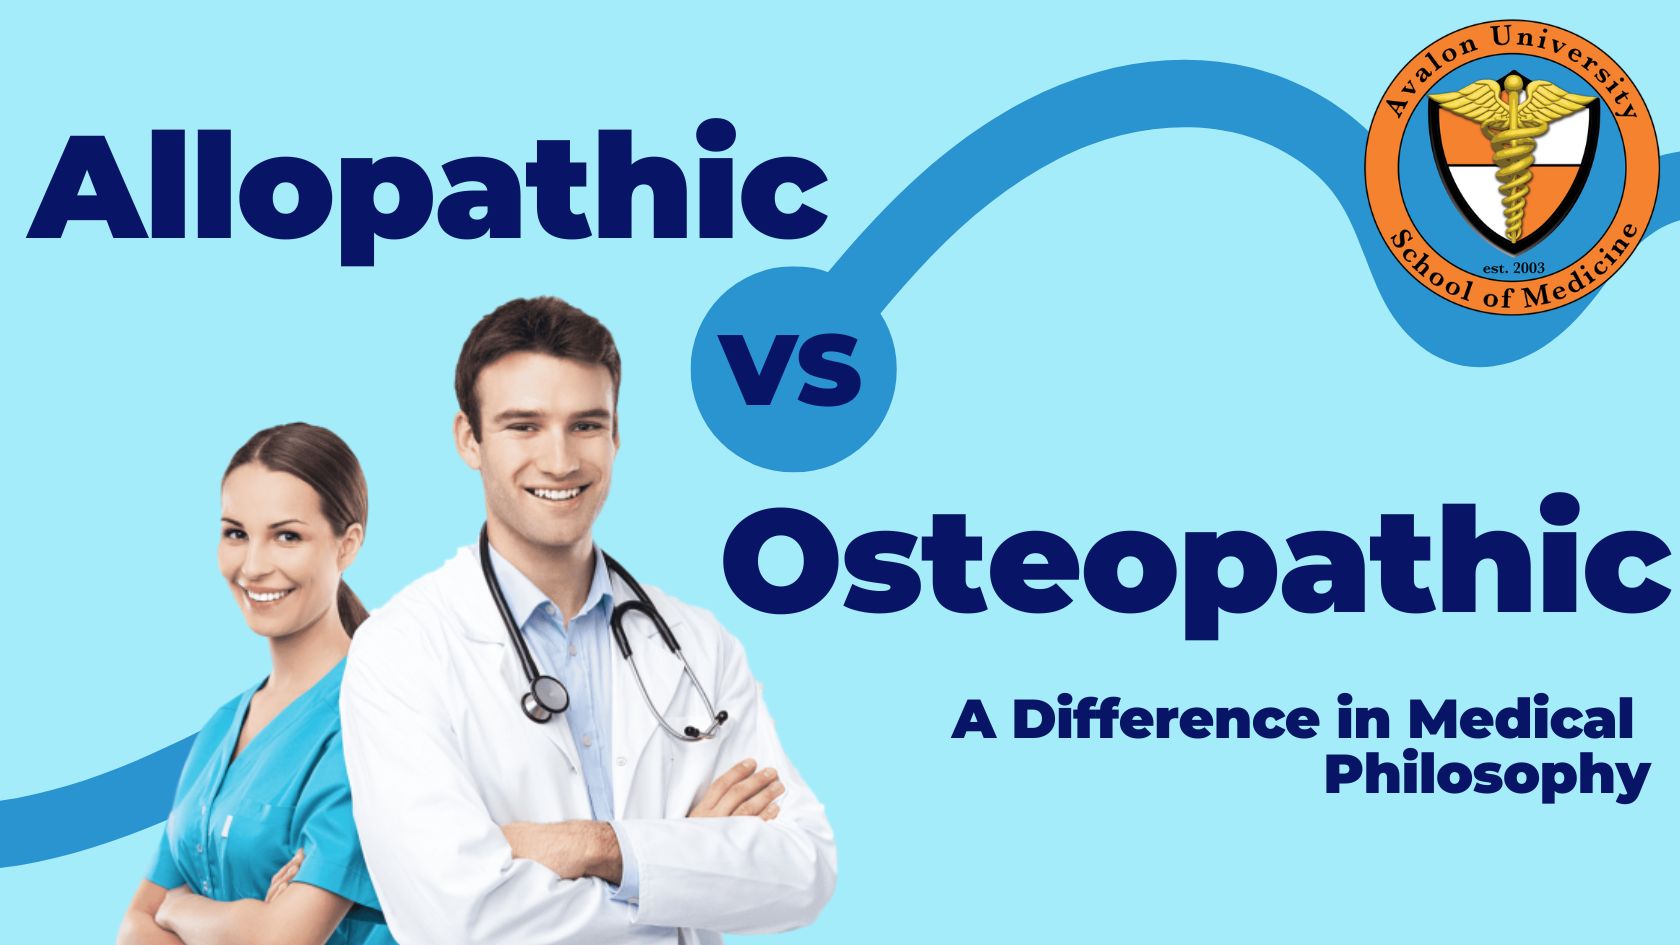 Allopathic vs Osteopathic